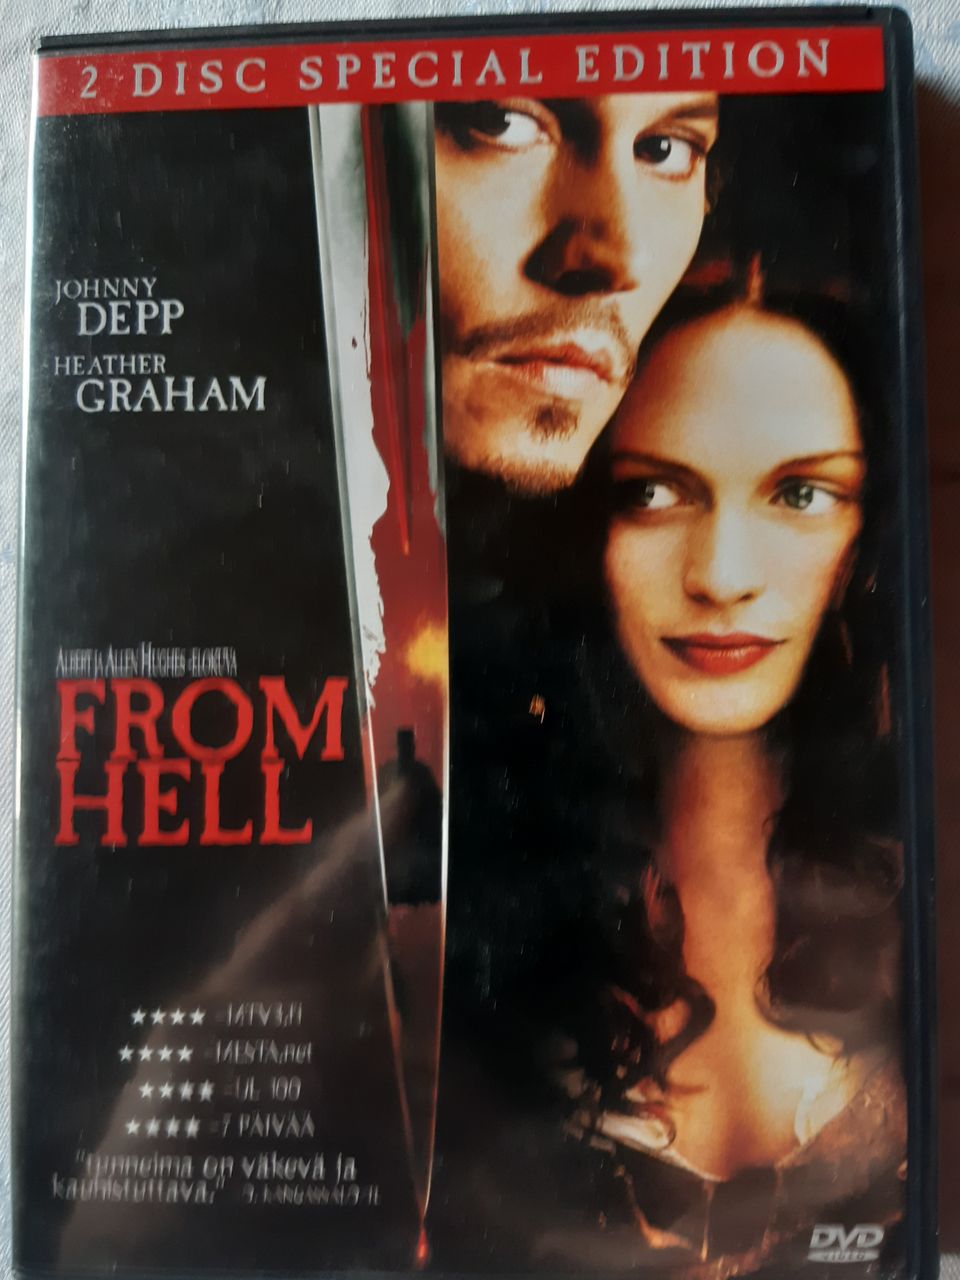 FROM HELL 2 Disc Special Edition DVD